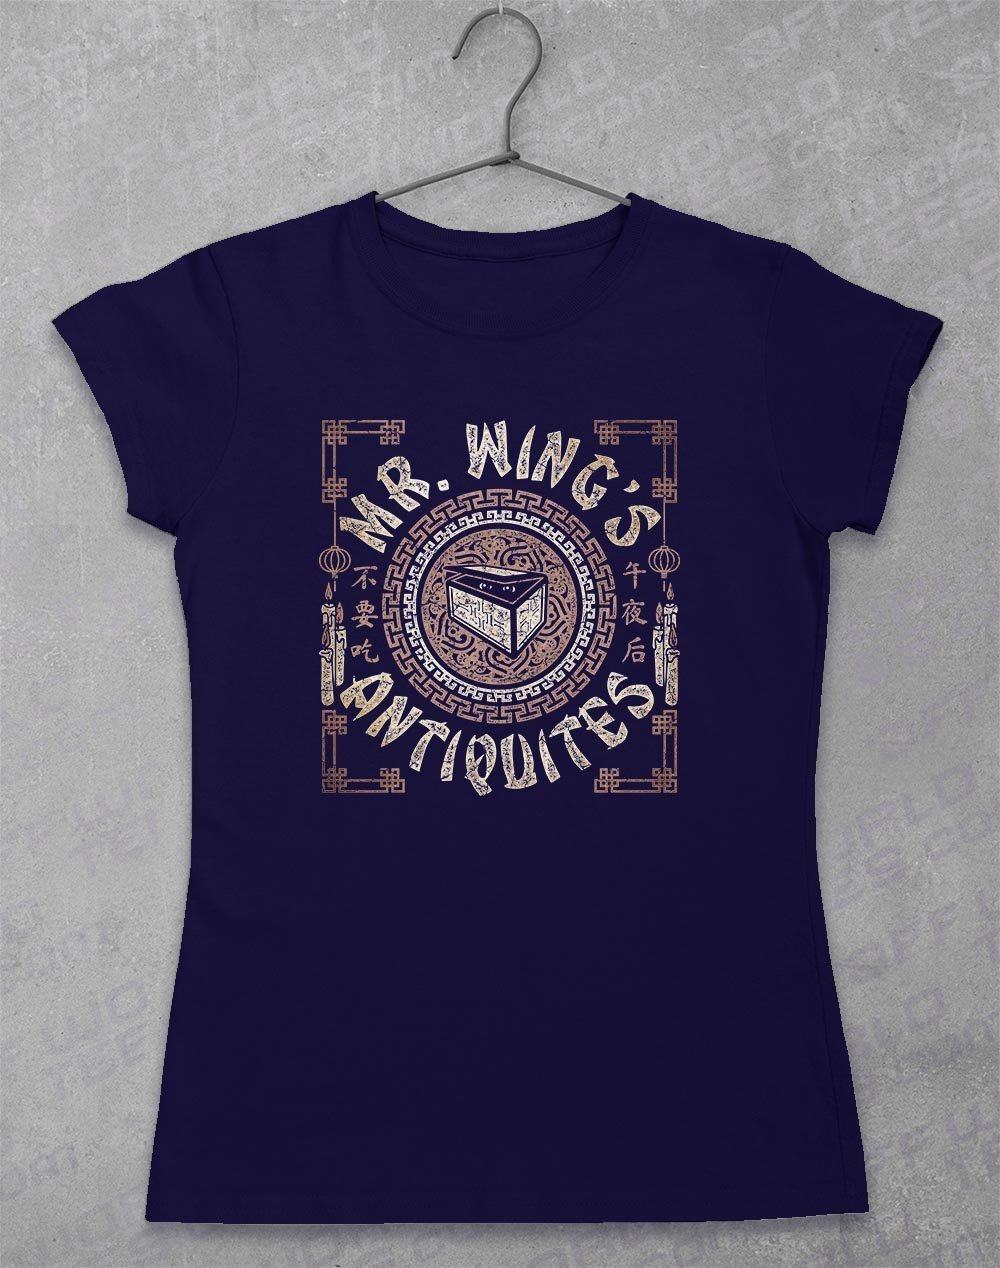 Mr Wing's Antiquities Women's T-Shirt 8-10 / Royal  - Off World Tees